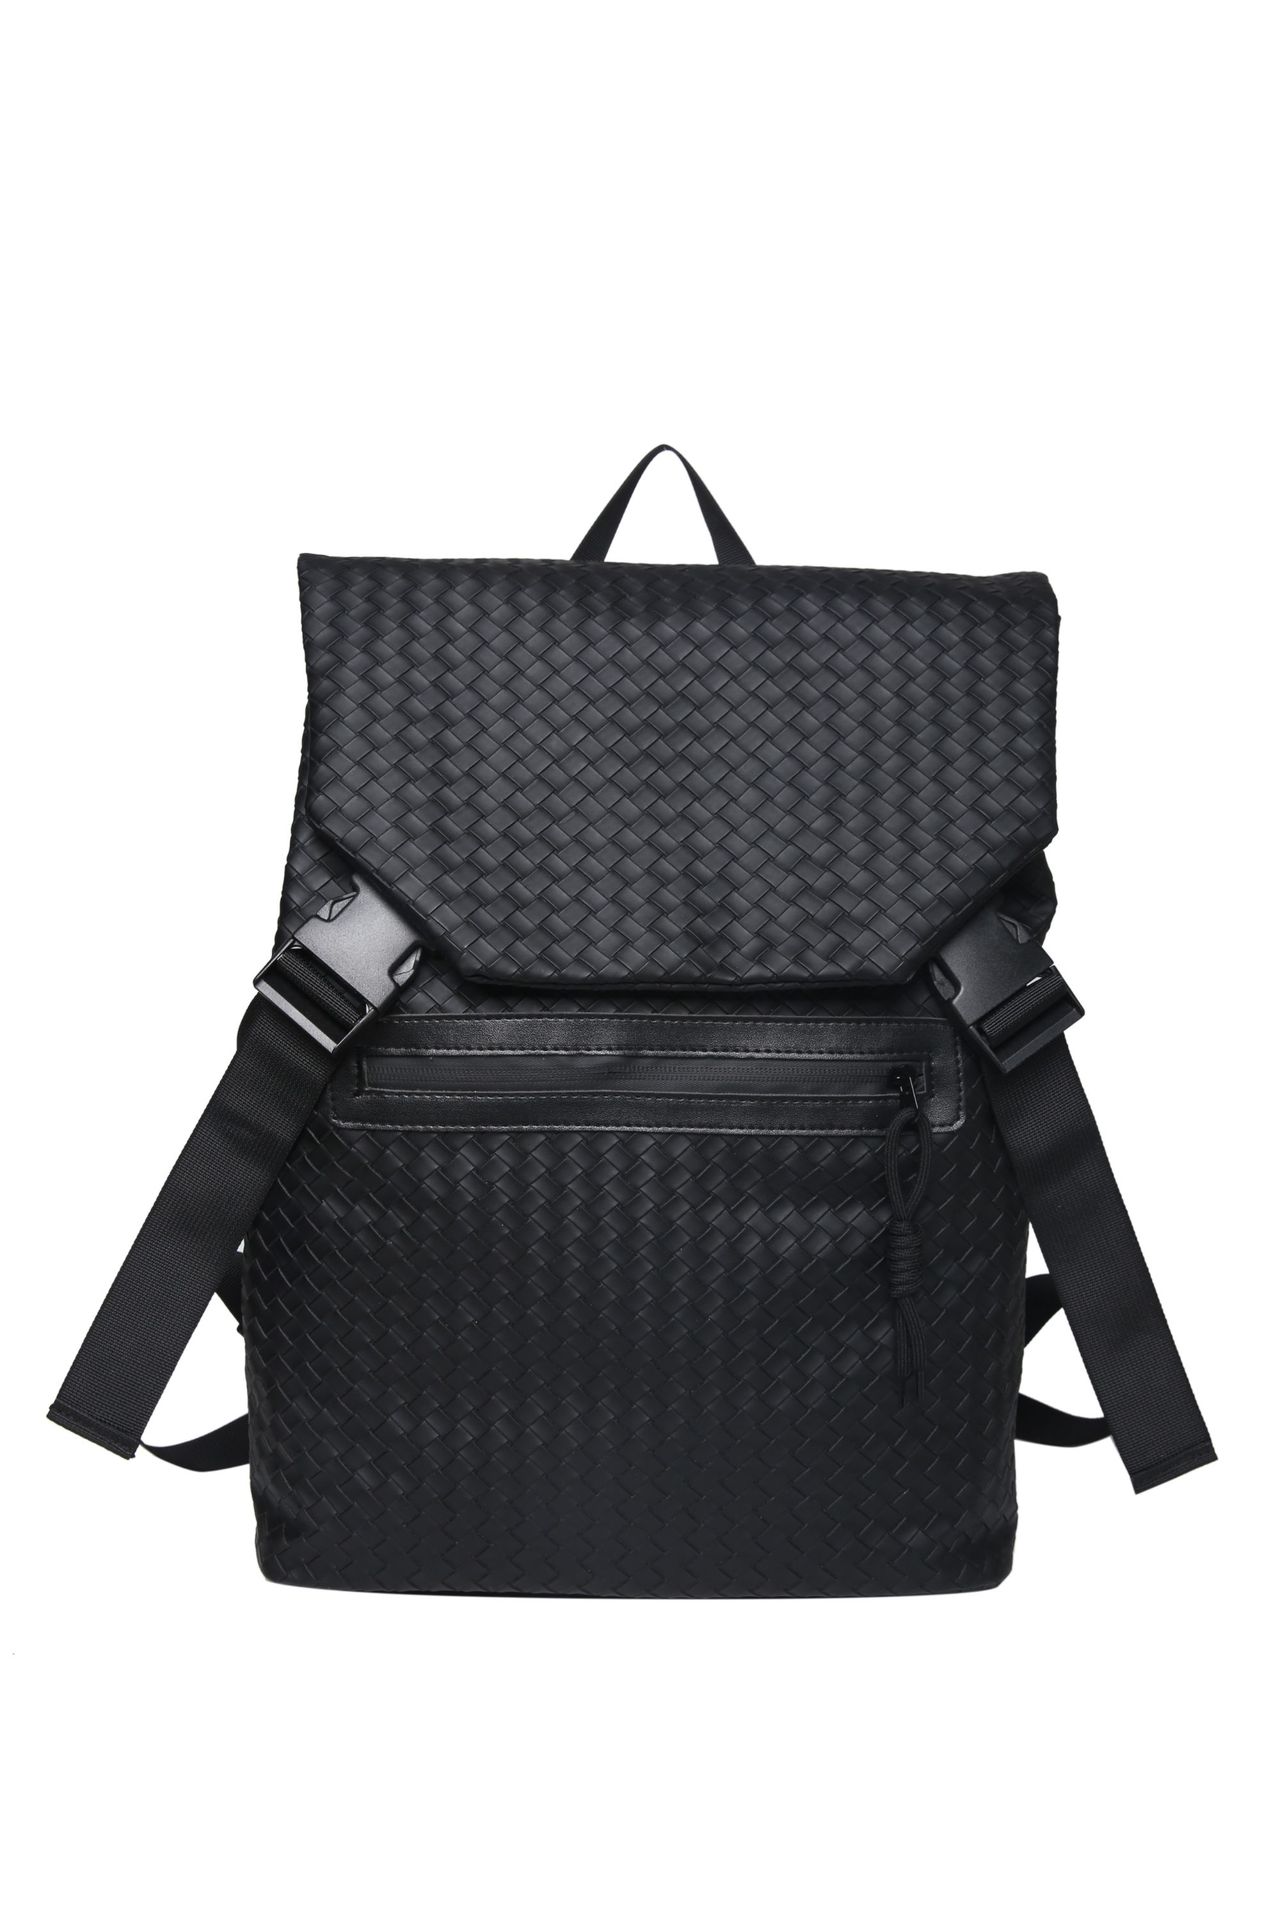 Textured Woven Pattern Backpack Business Female 2024 New Men's Bag College Student Capacity Schoolbag Computer Backpack